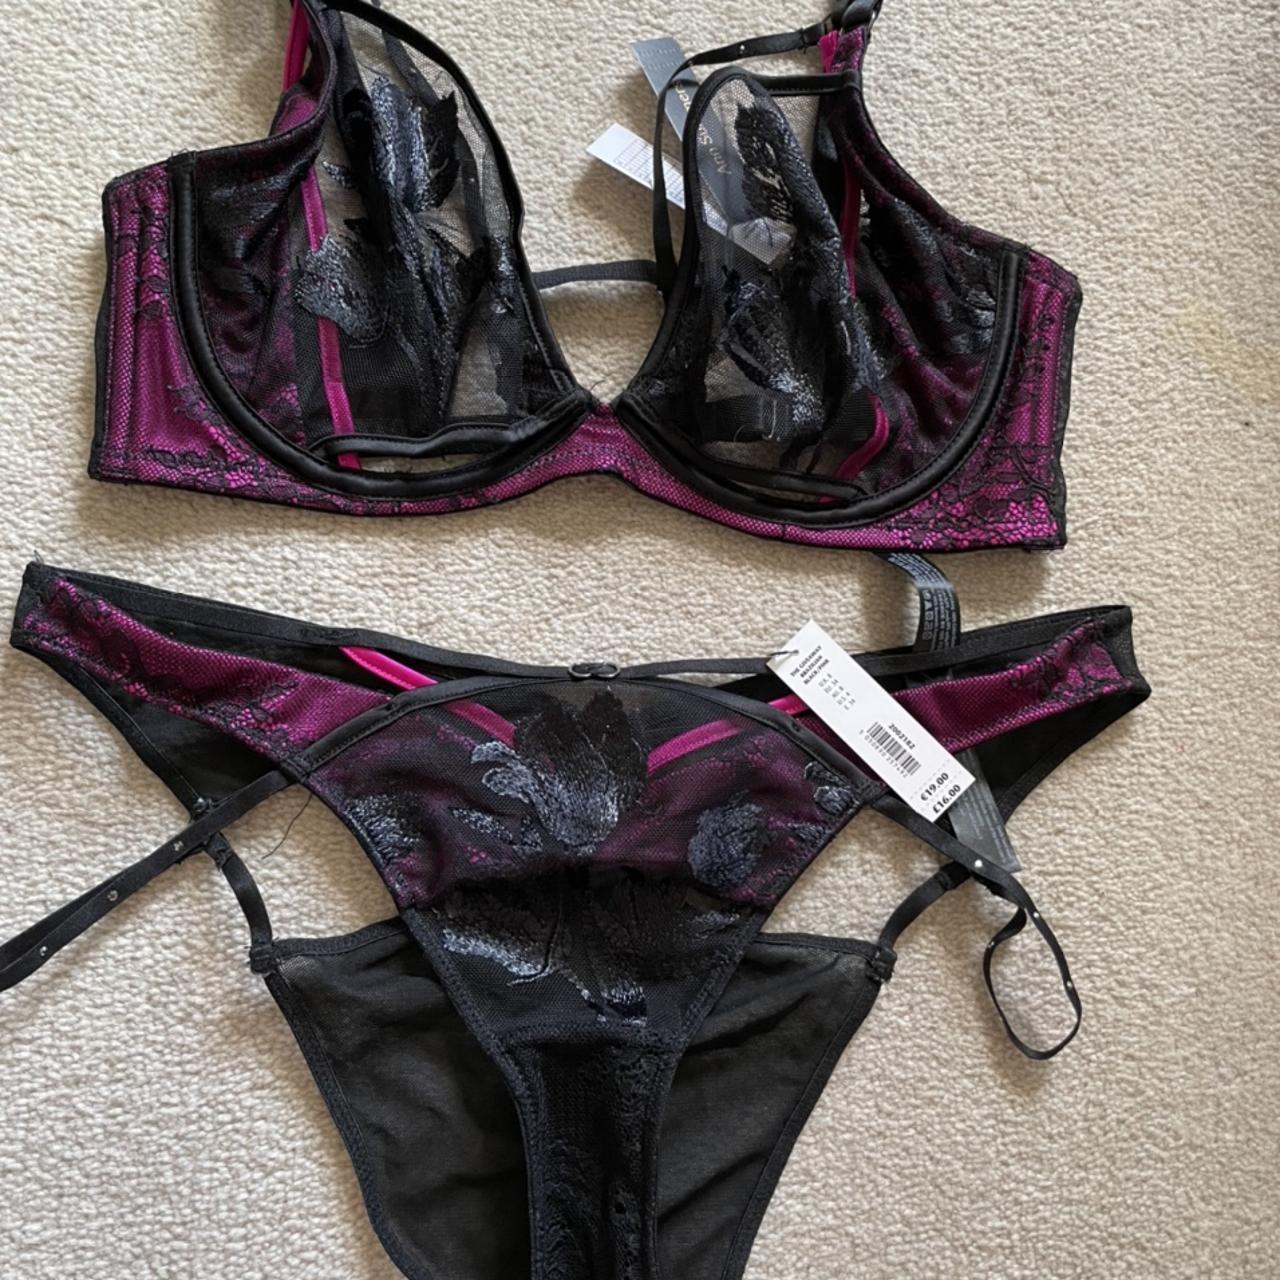 Ann summers set. The Giveaway Plunge Bra has padded